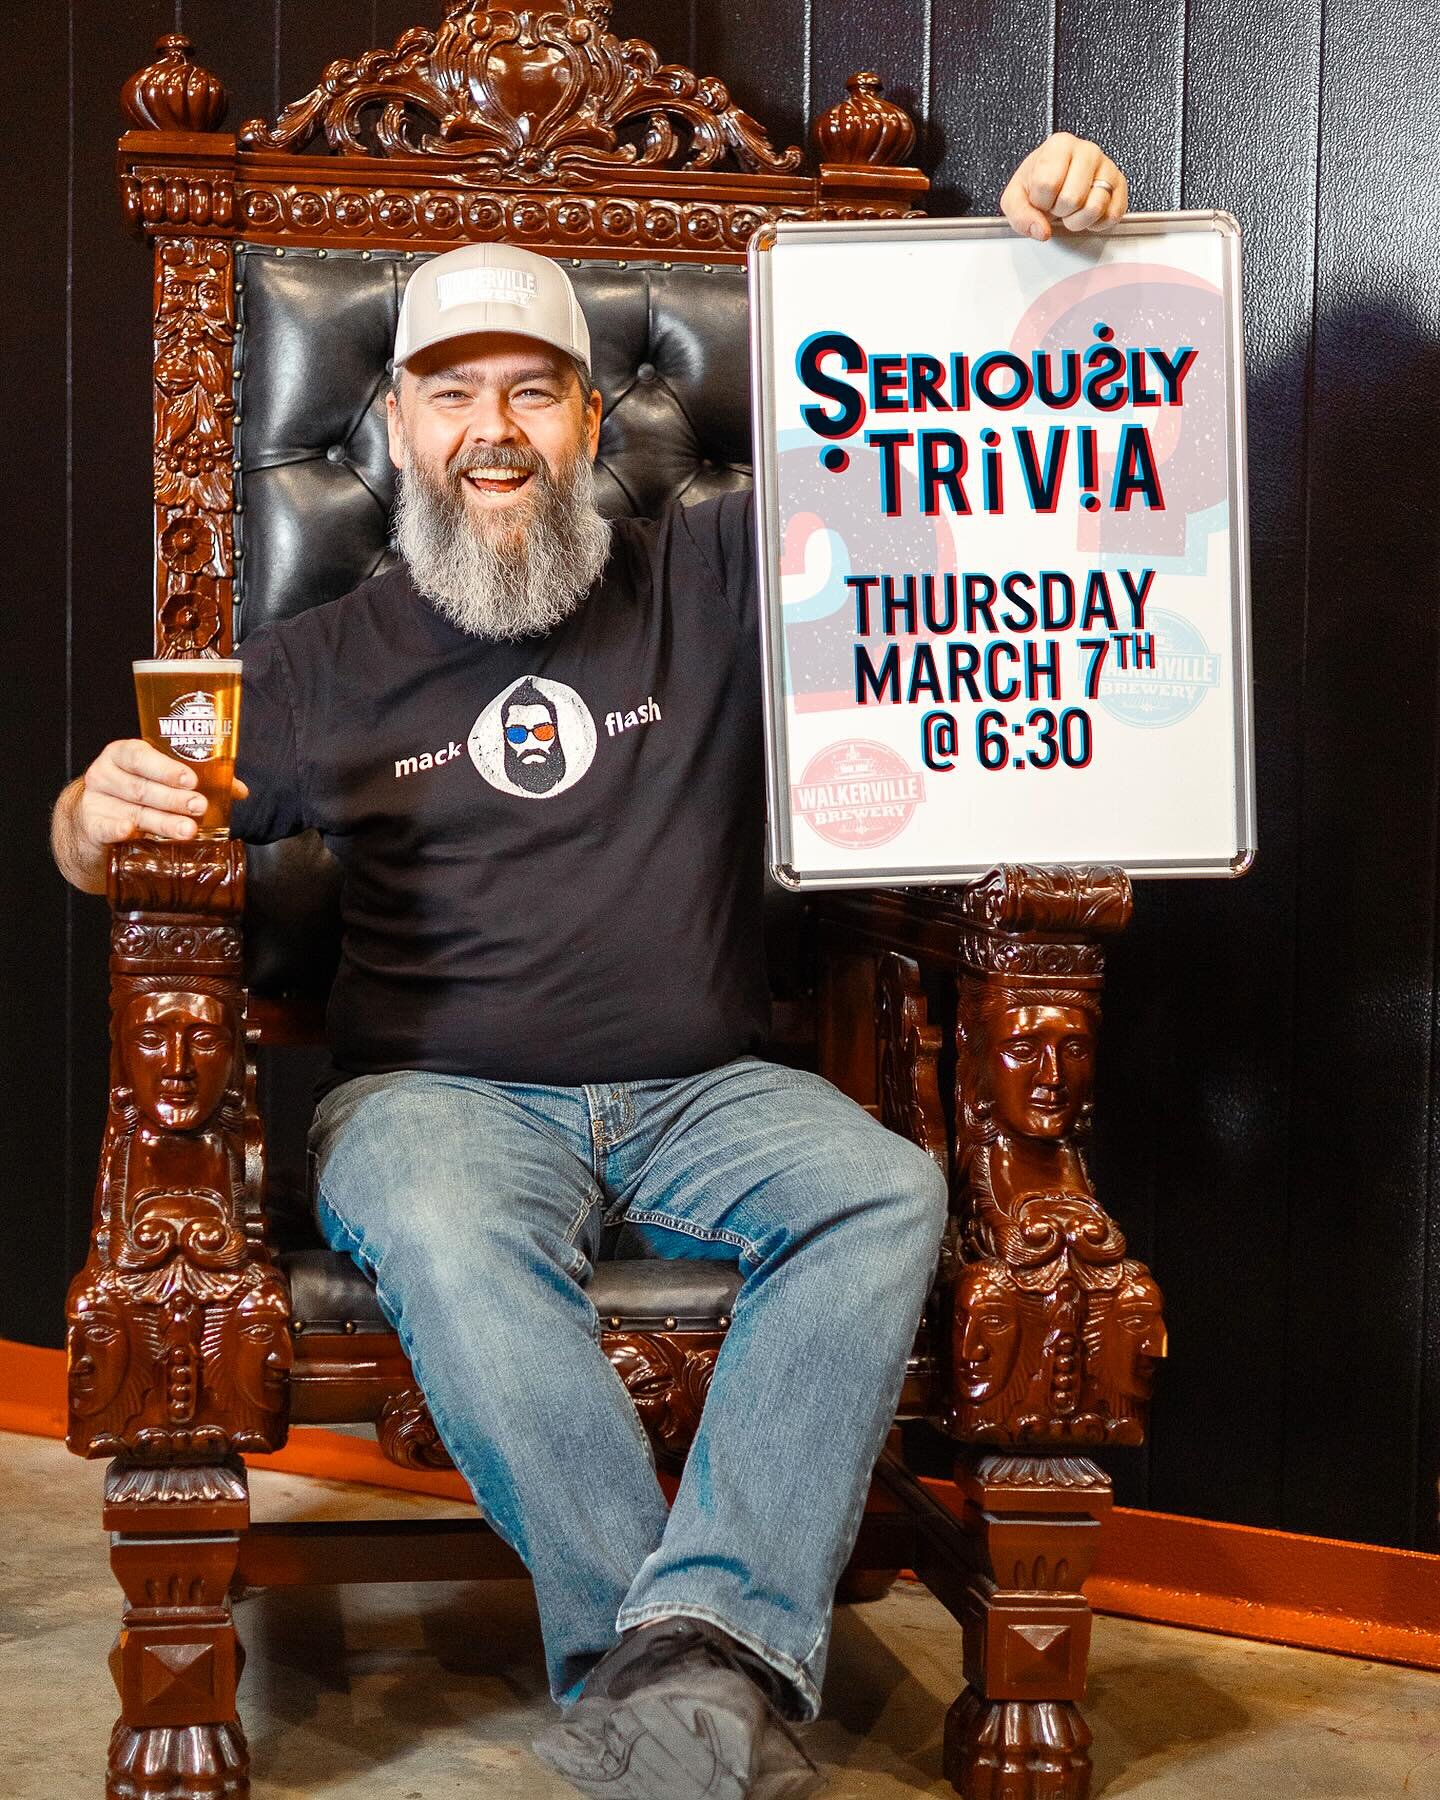 Ready to level up your IQ? 🧠 This Thursday, March 7th at 6:30pm we&rsquo;ve got another round of #SeriouslyTrivia with @mackflash! Gather your team and come on out for a night filled with game-show style trivia, word puzzles and brain teasers!

Seri